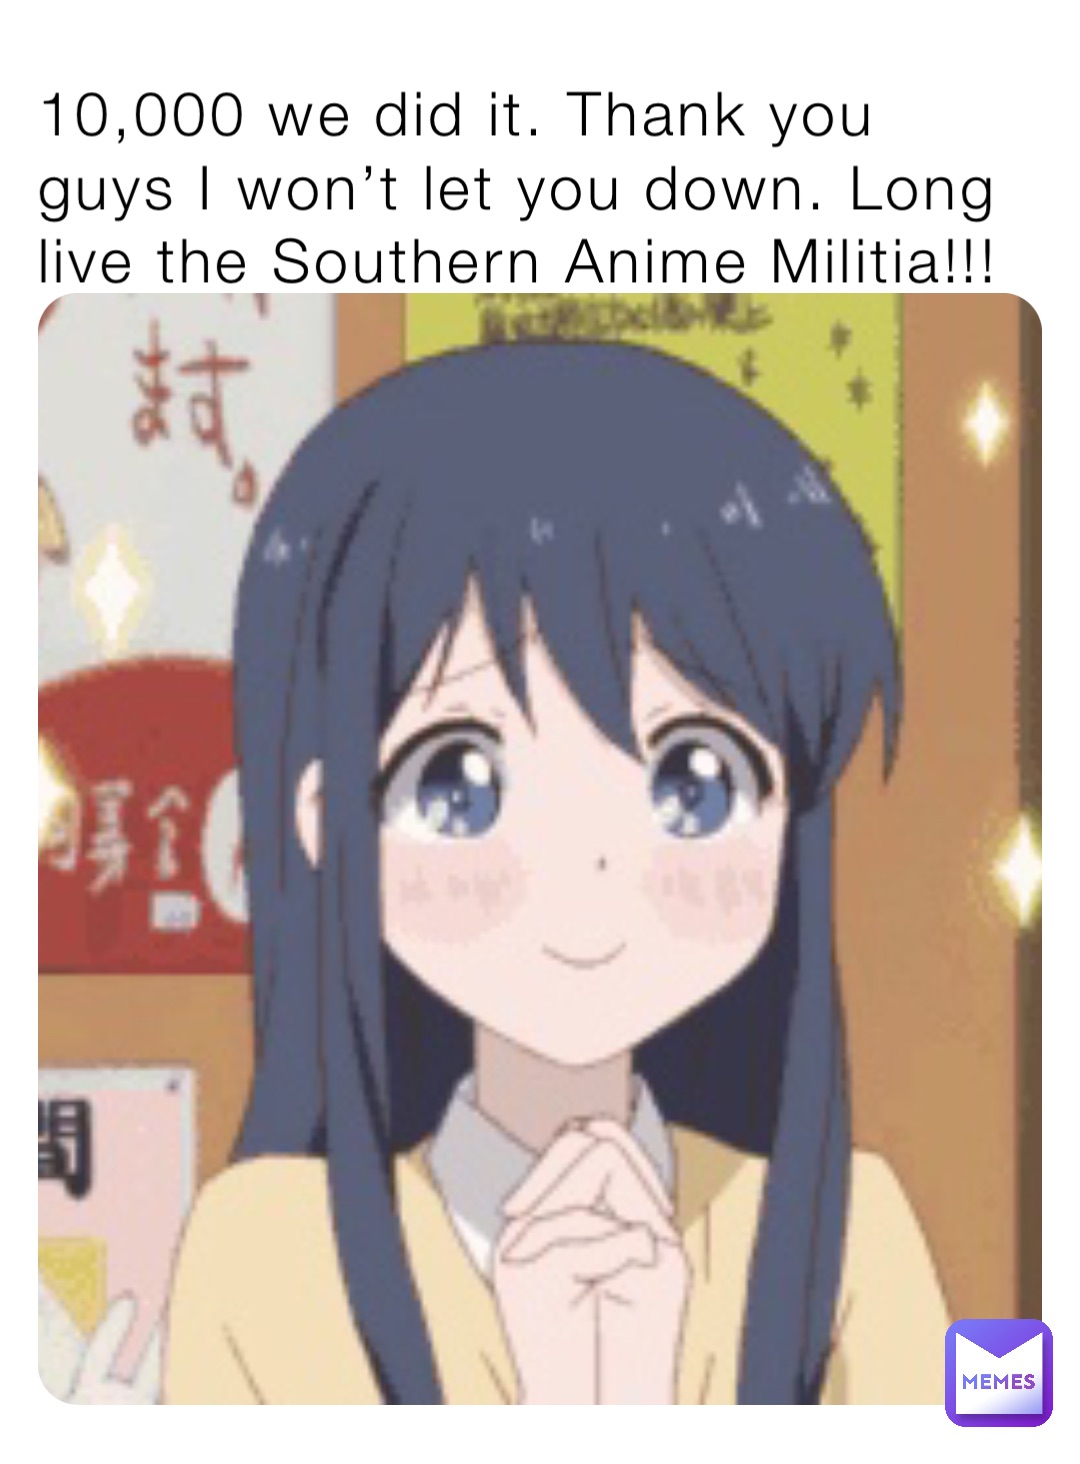 10,000 we did it. Thank you guys I won’t let you down. Long live the Southern Anime Militia!!!